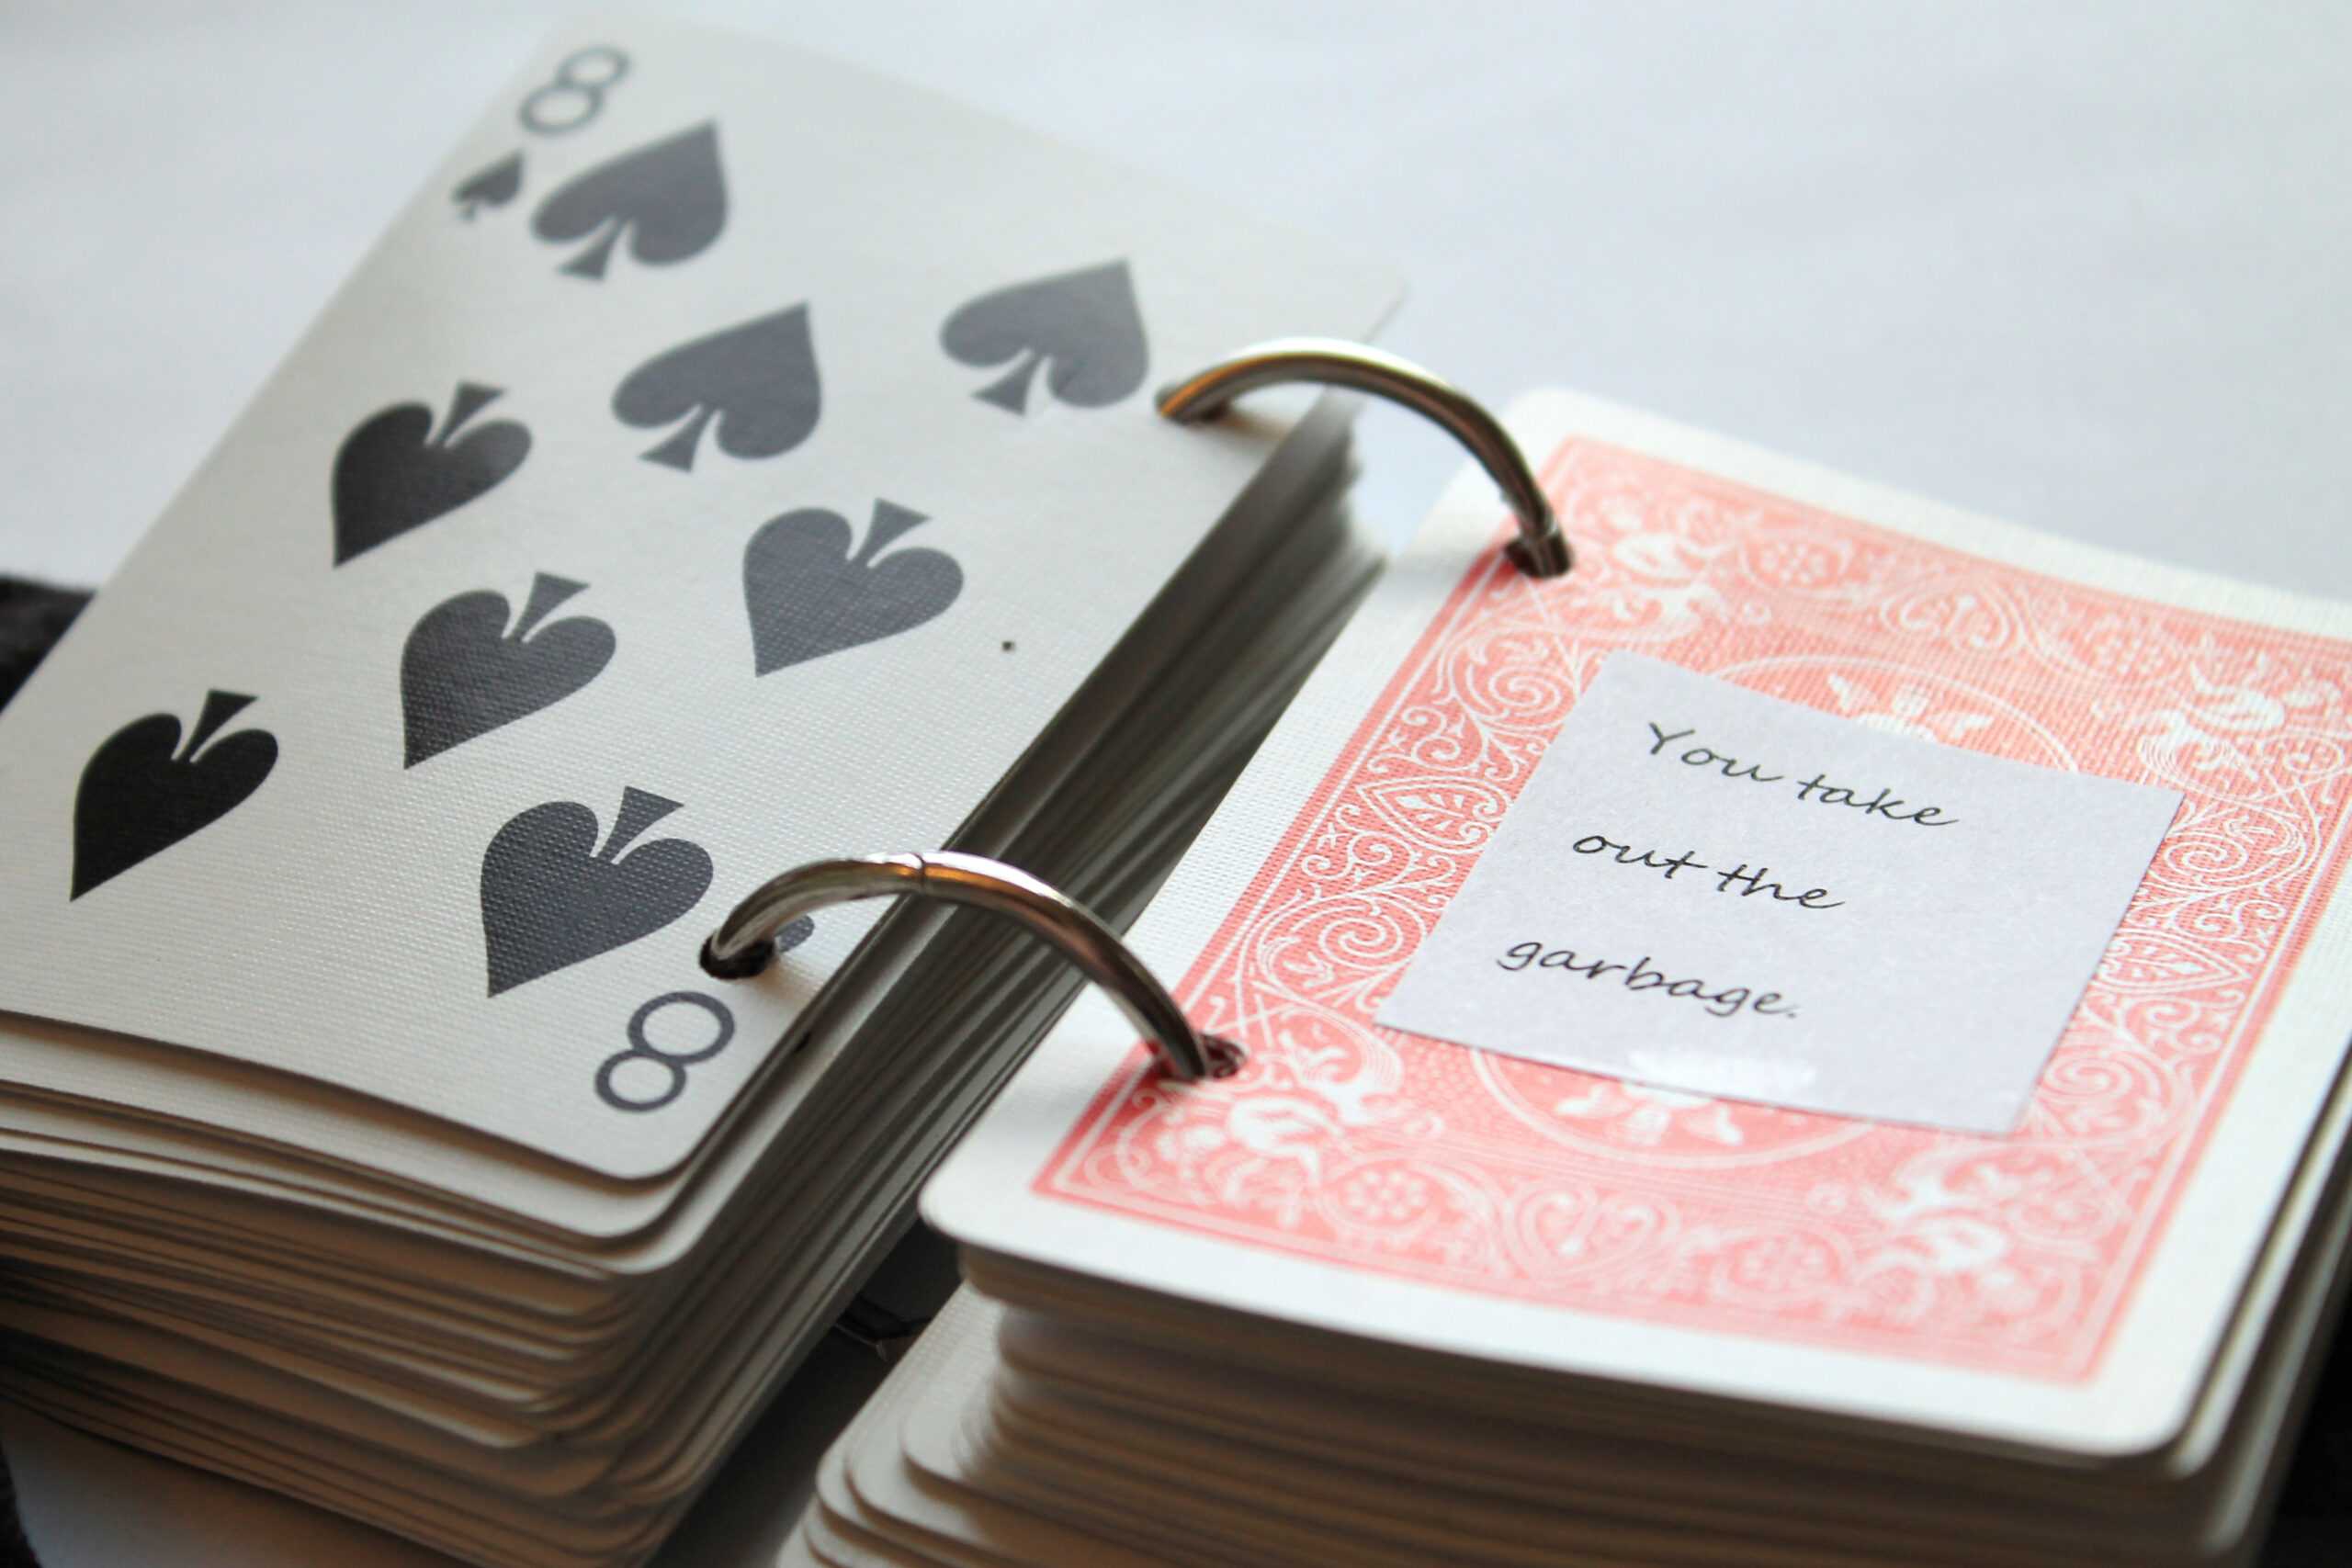 52 Reasons I Love You – Playing Card Book Tutorial Intended For 52 Things I Love About You Deck Of Cards Template